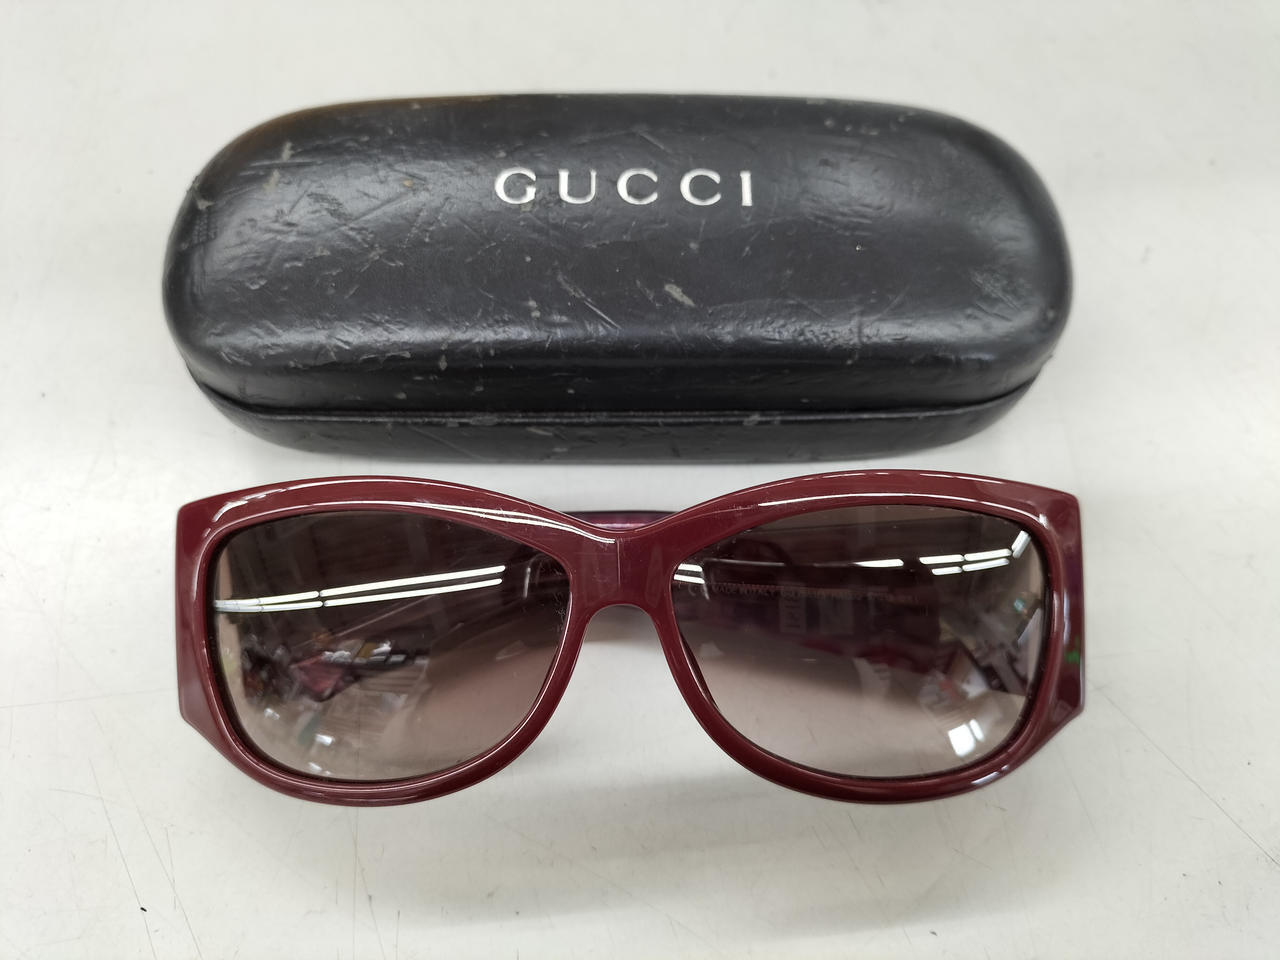 GUCCI GG2953 Gucci sunglasses red case included many scratches